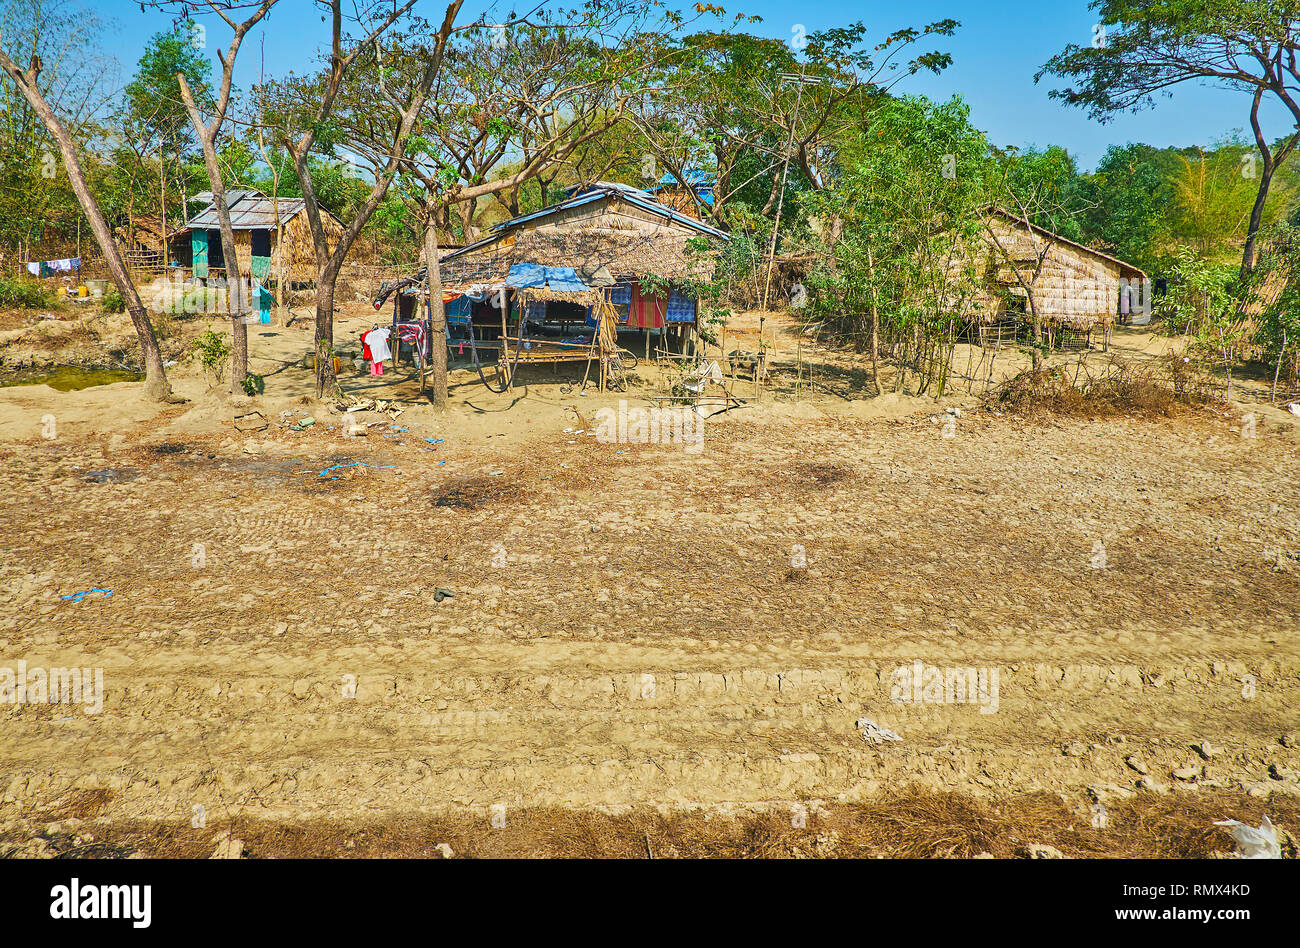 The shabby nipa huts on stilts among the green trees of the small forest, Dar Pein, Yangon suburb, Myanmar. Stock Photo